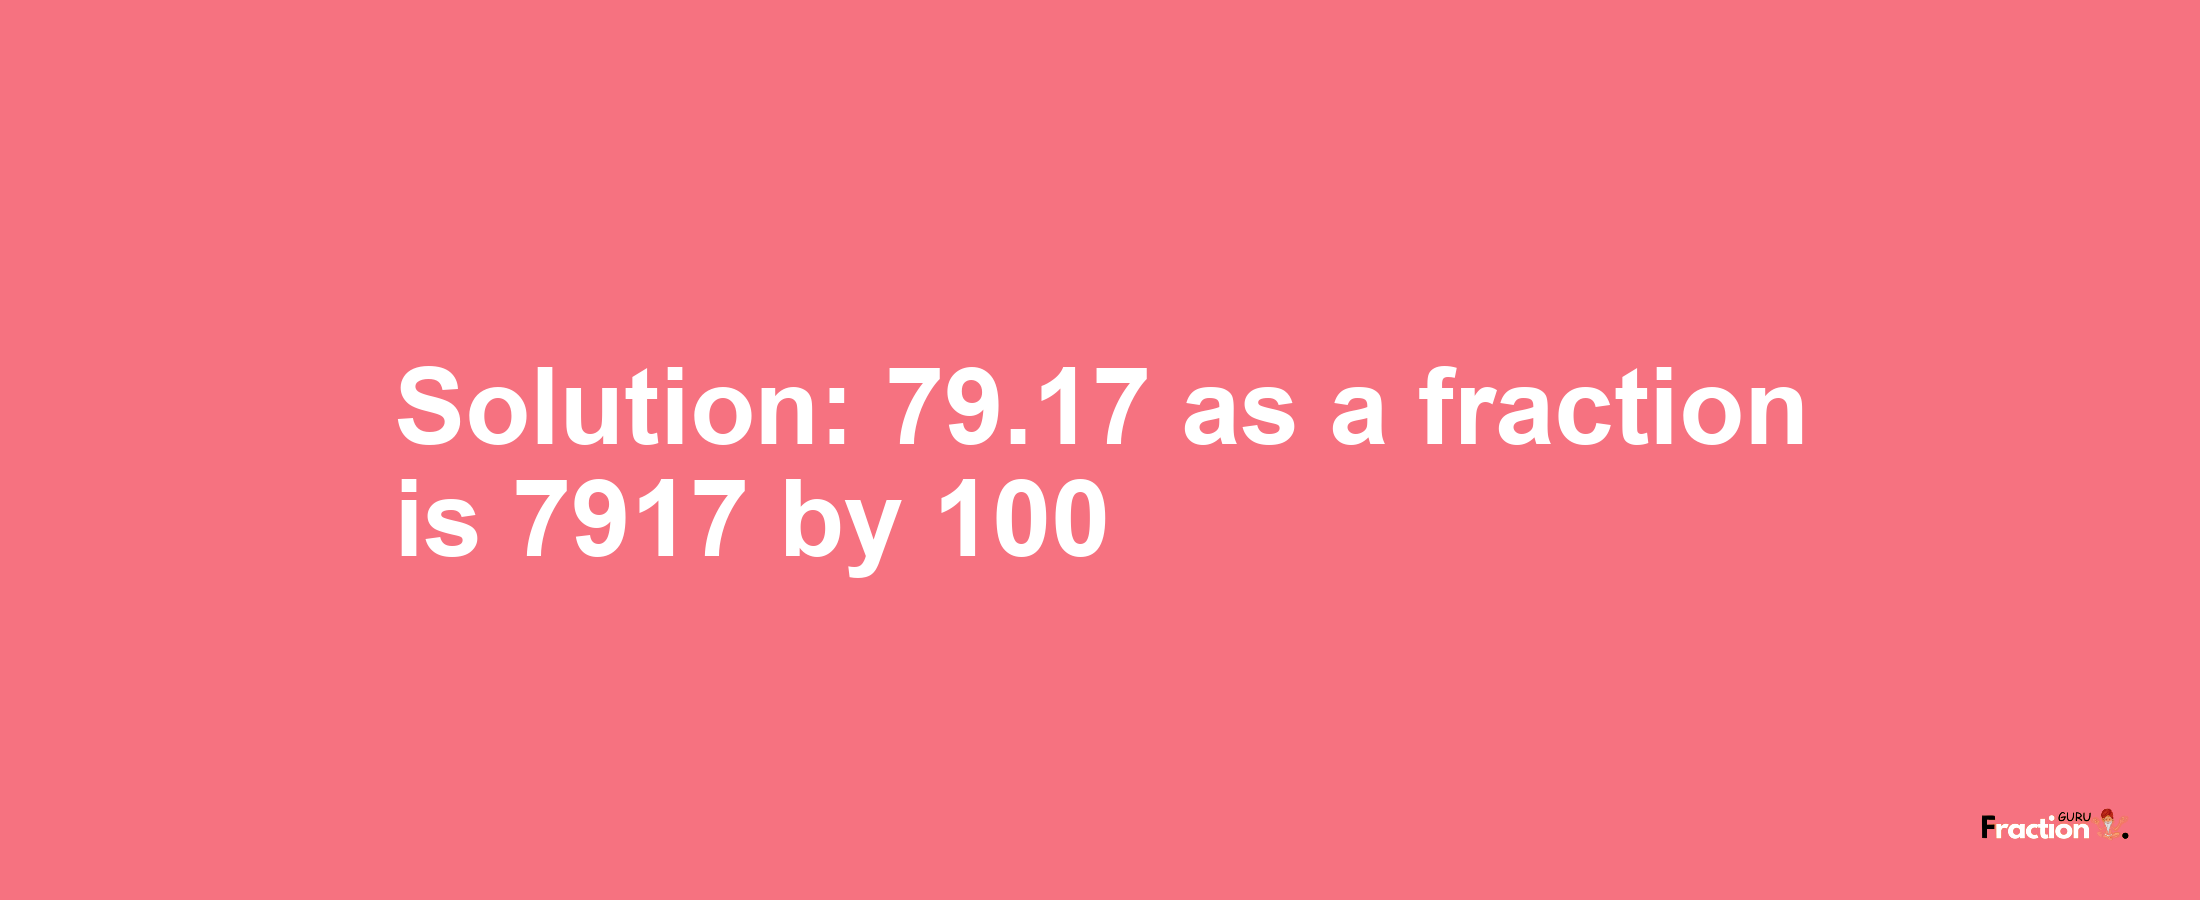 Solution:79.17 as a fraction is 7917/100